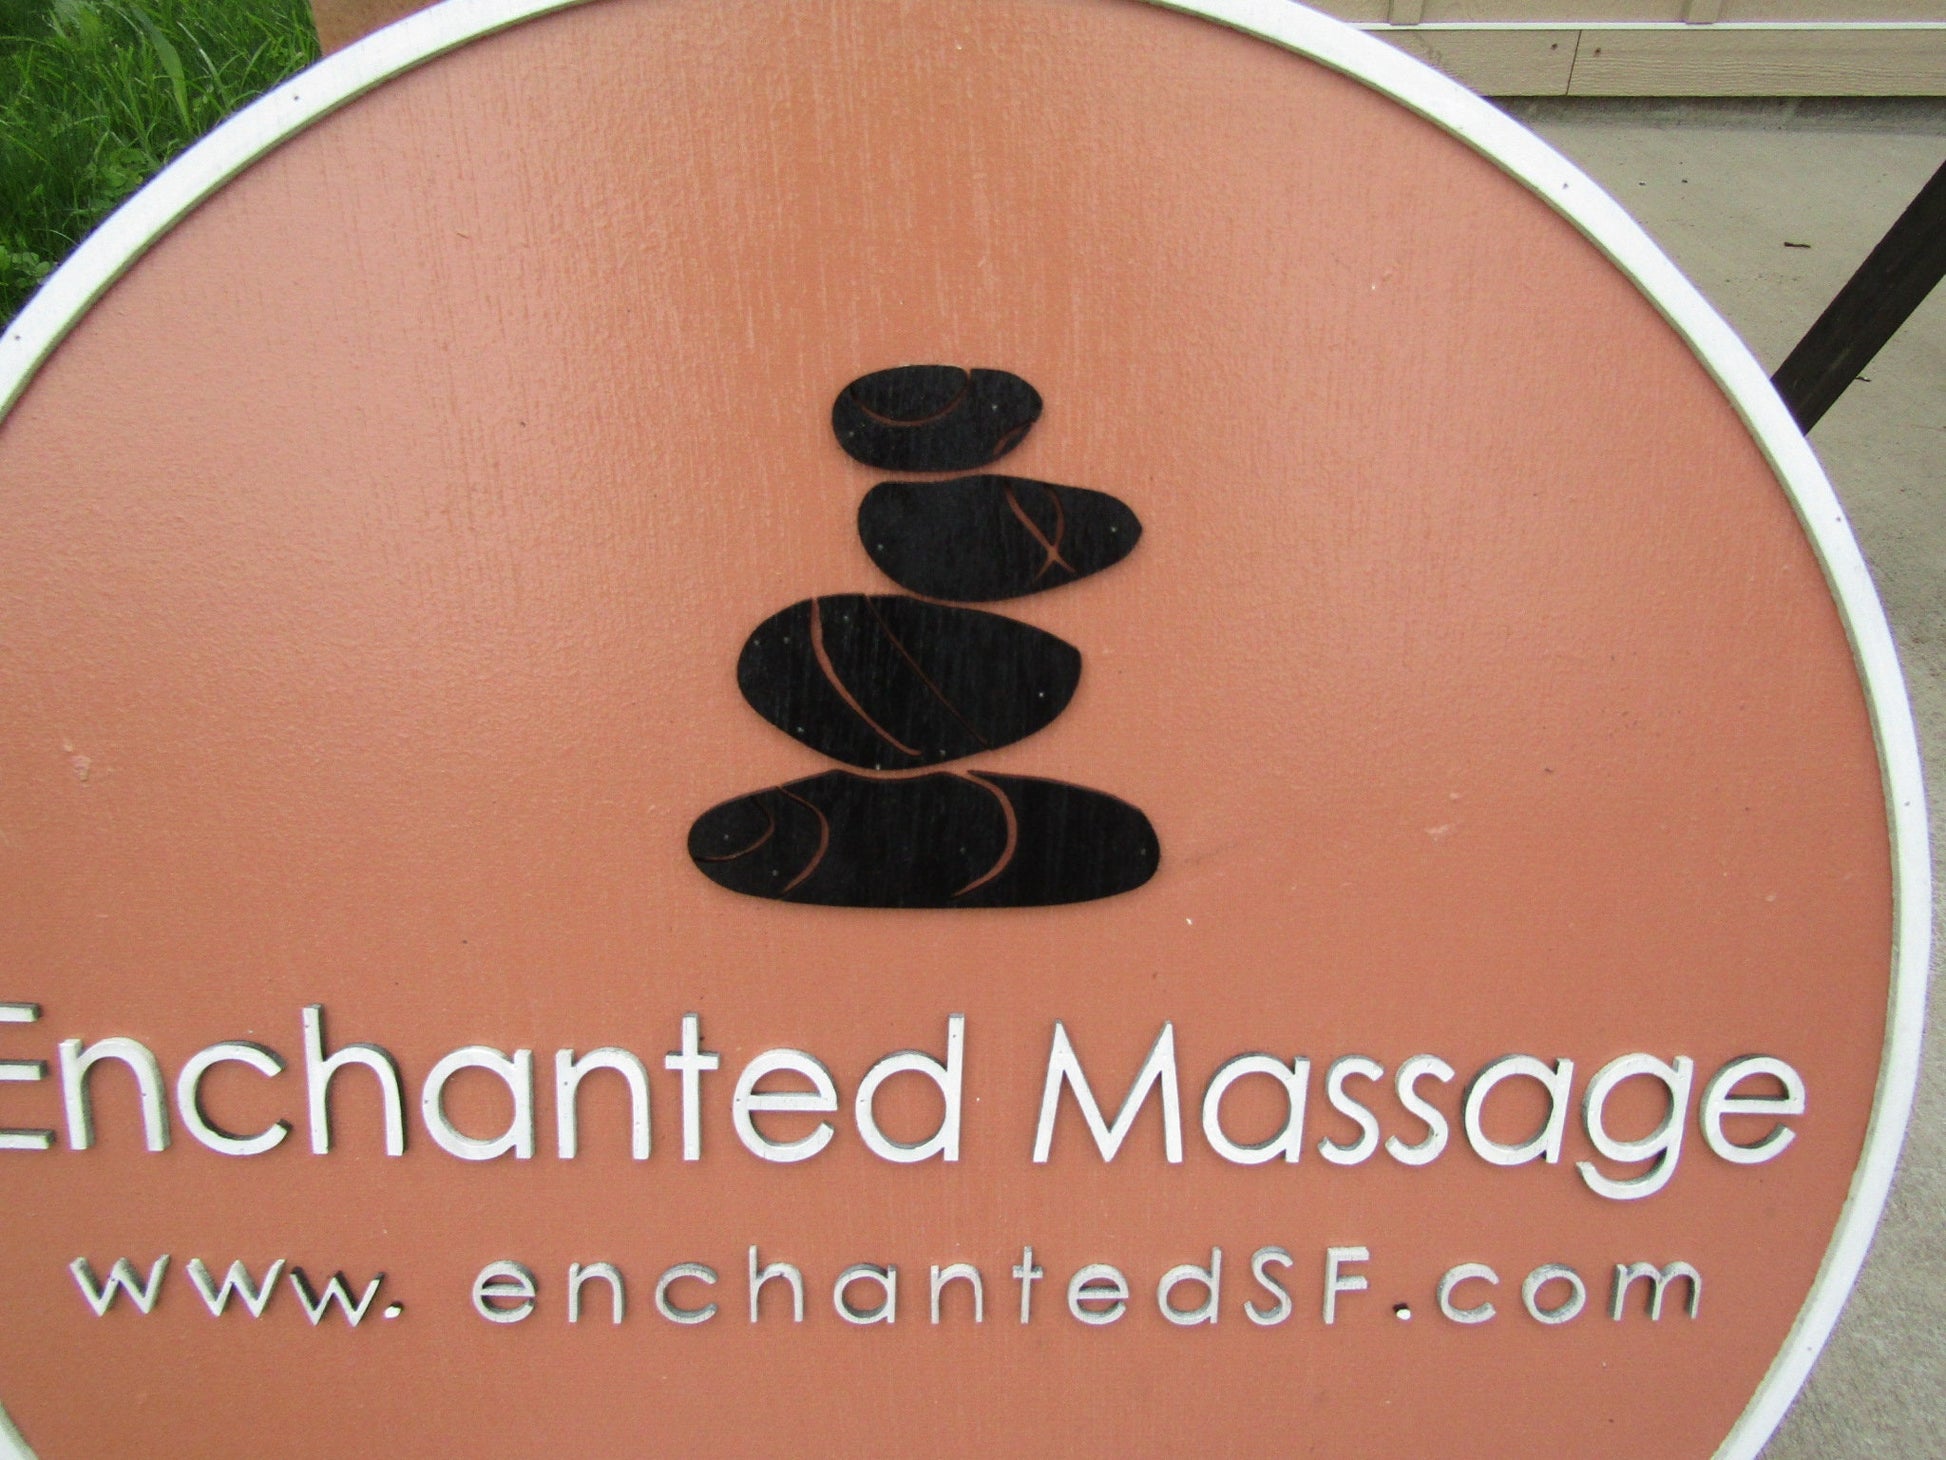 Enchanted Massage Custom Round Business Commerical Signage Made to Order Store Front Small Shop Logo Circle Wooden Handmade Informational